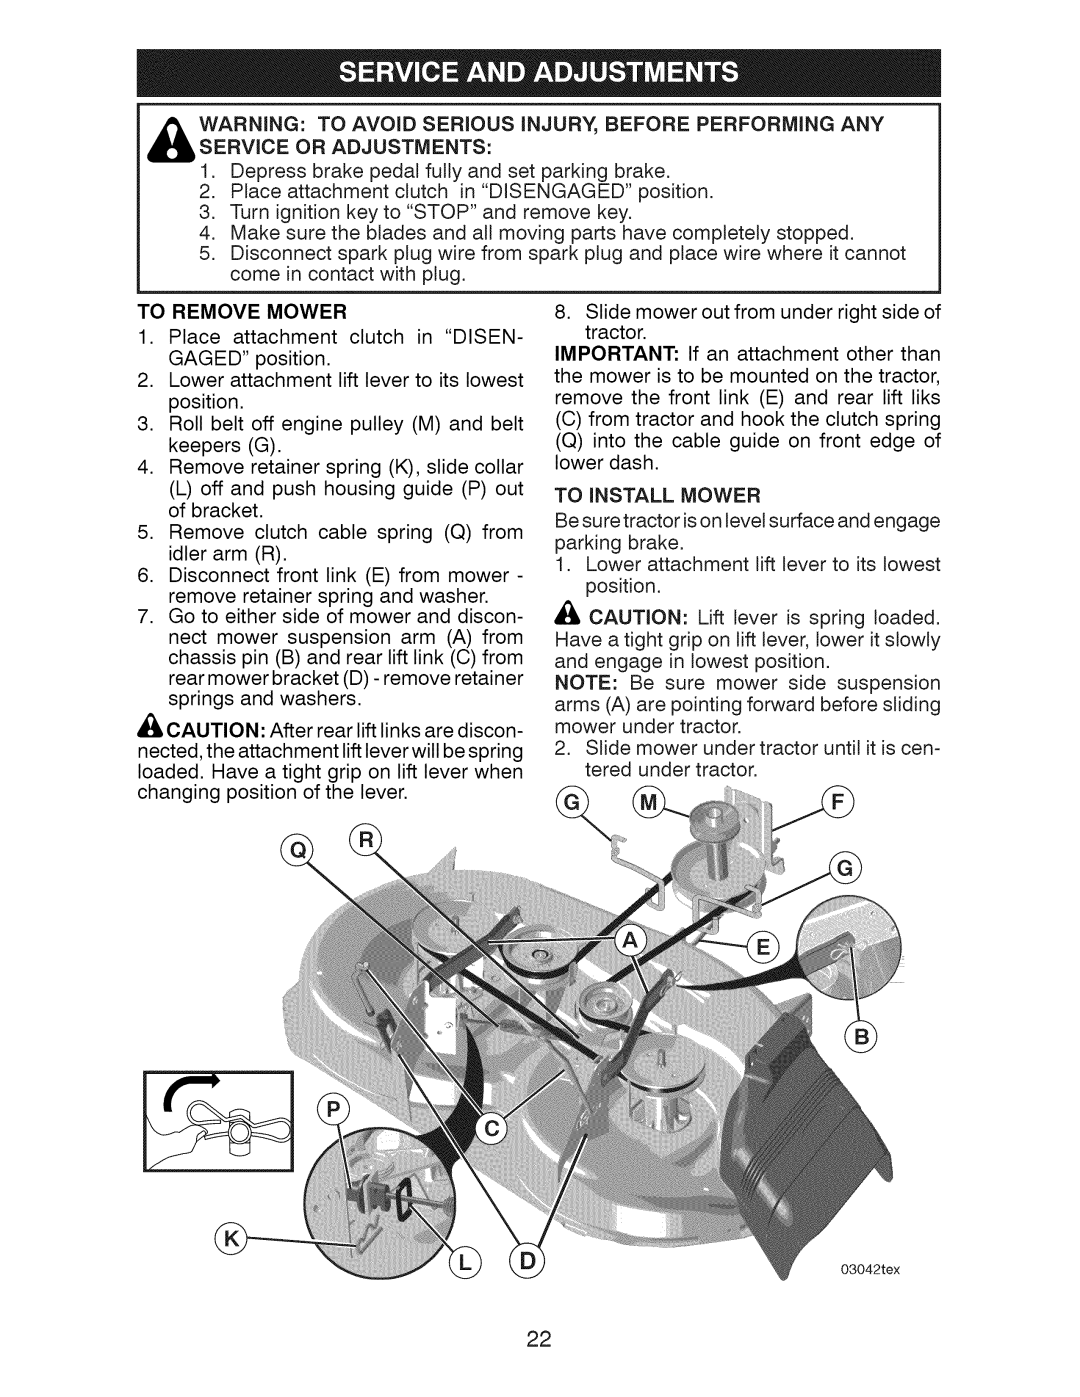 Craftsman 917.289283 owner manual To Remove Mower, To Install Mower 